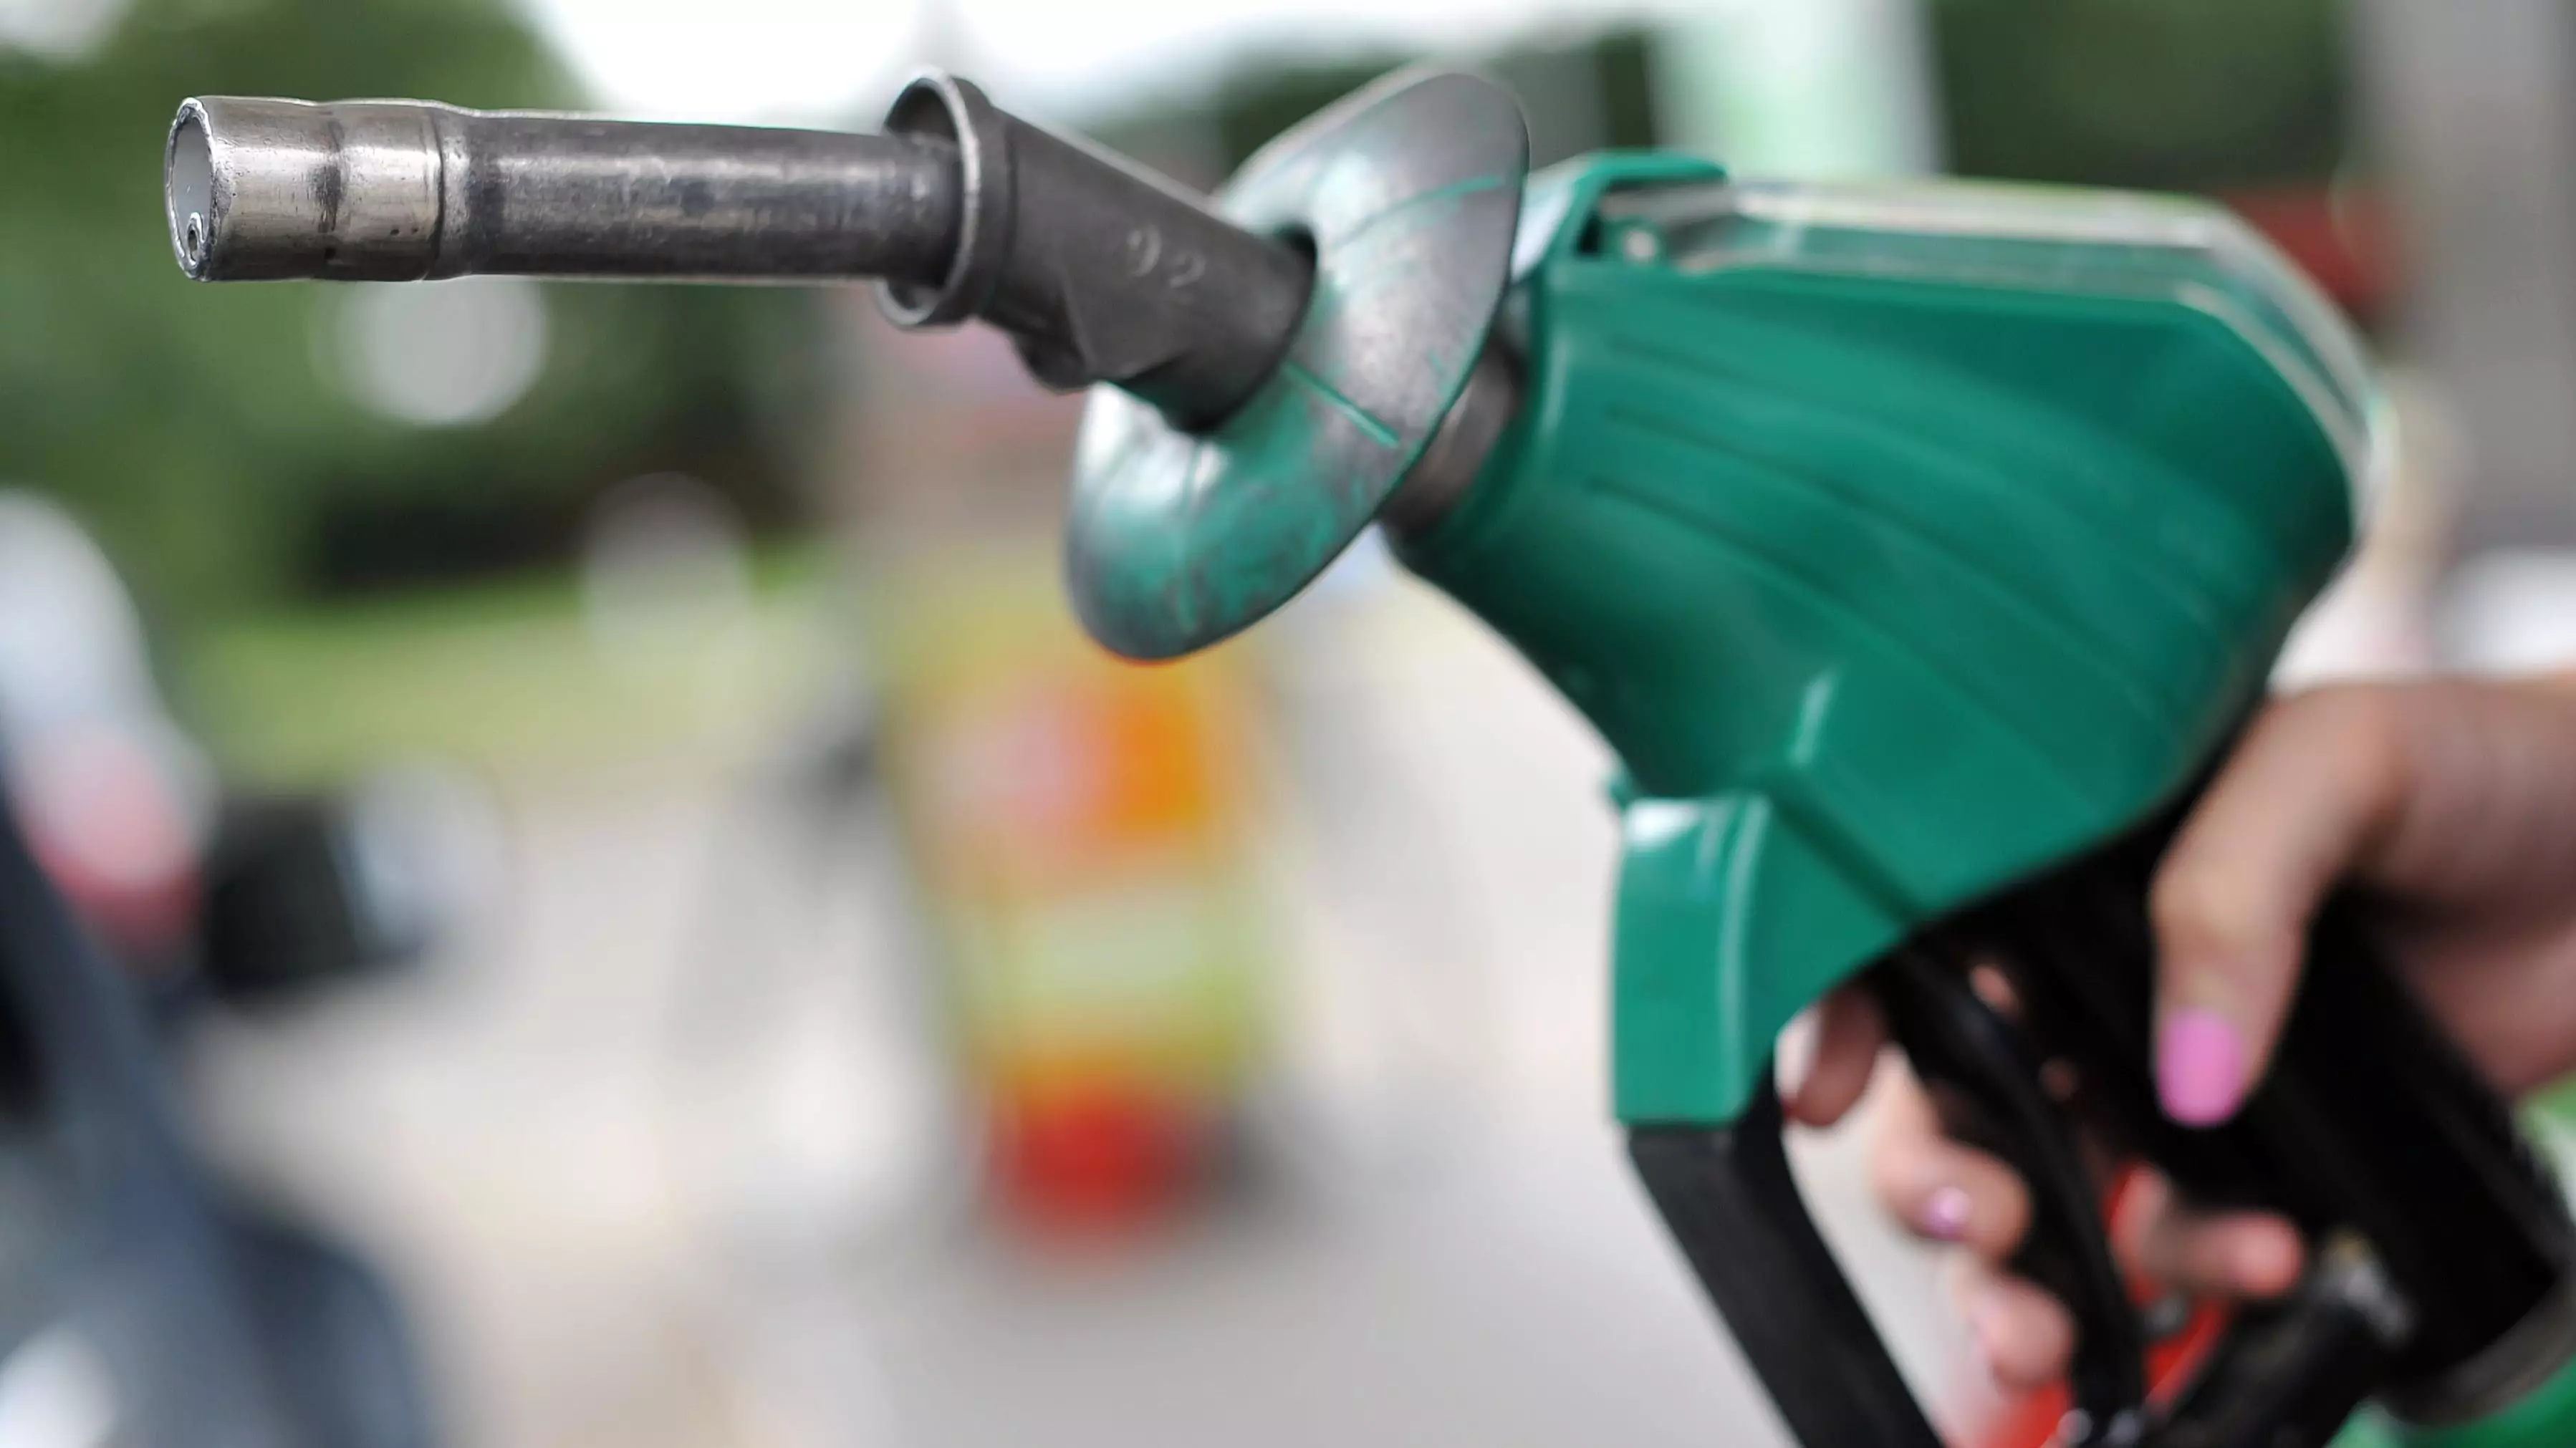 Asda, Morrisons And Sainsbury's To Reduce Unleaded And Diesel Prices By Up To 2p Per Litre